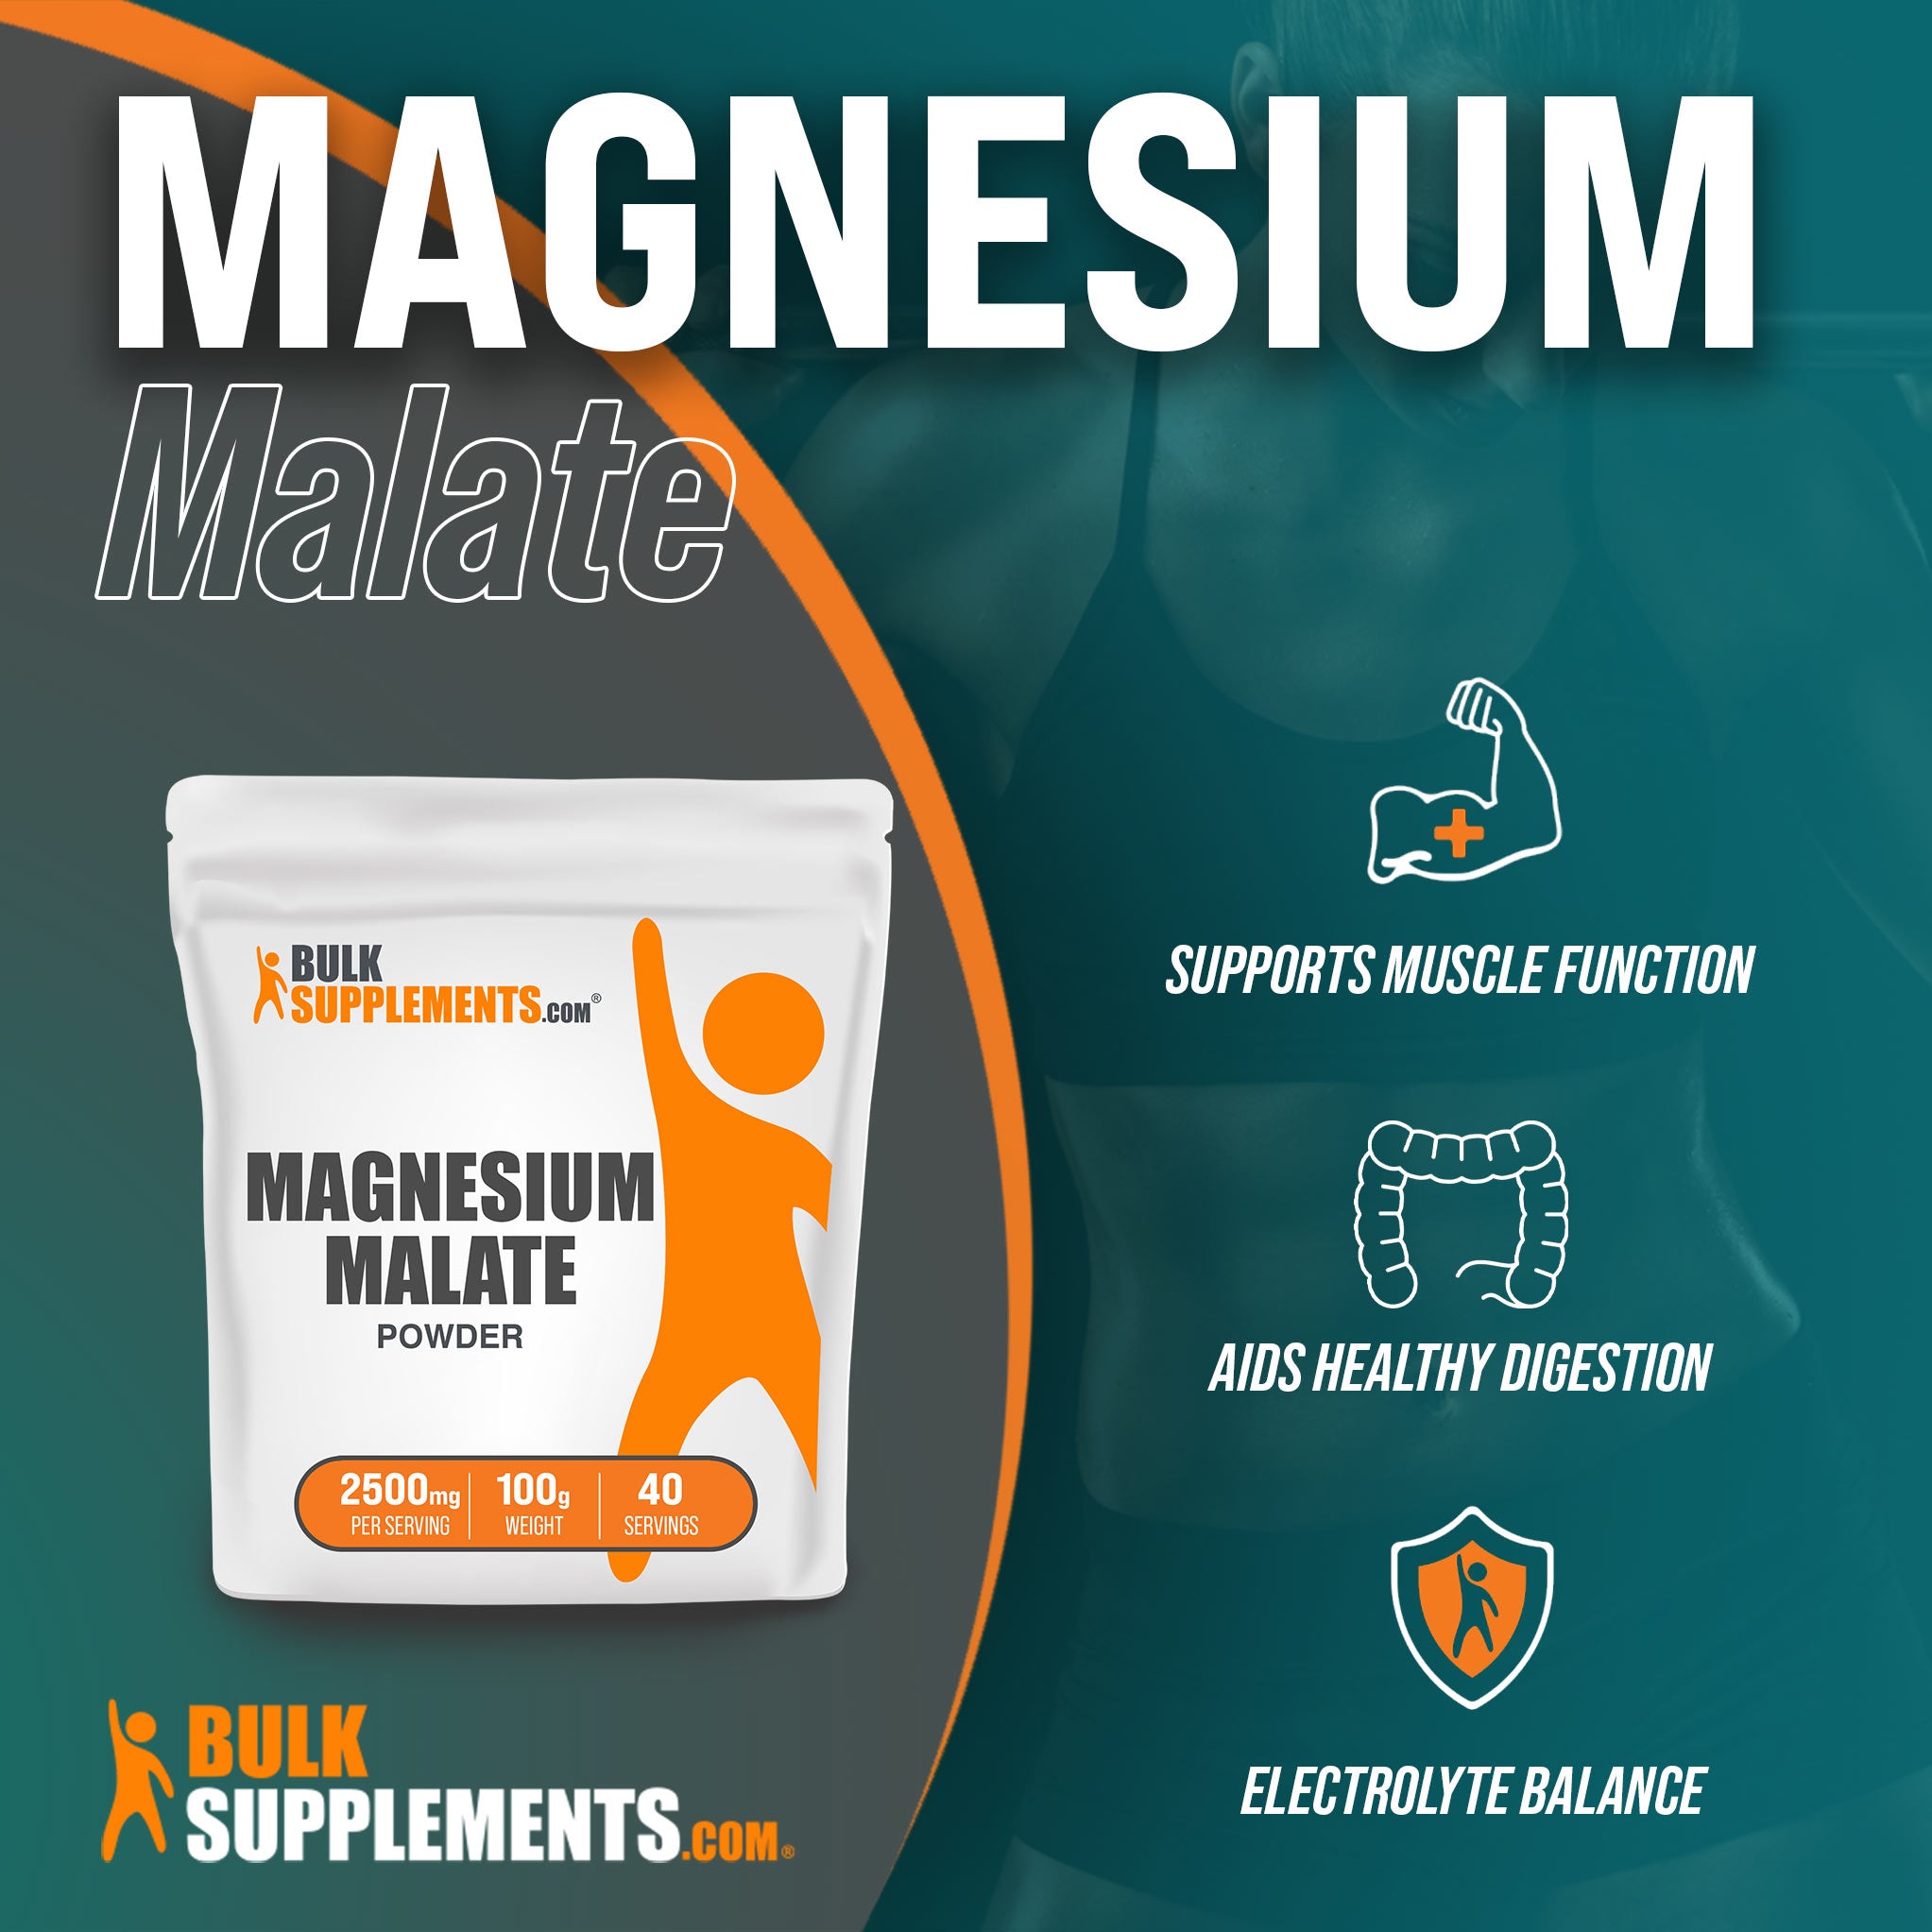 Magnesium Malate Powder from Bulk Supplements for muscles, digestion and electrolytes